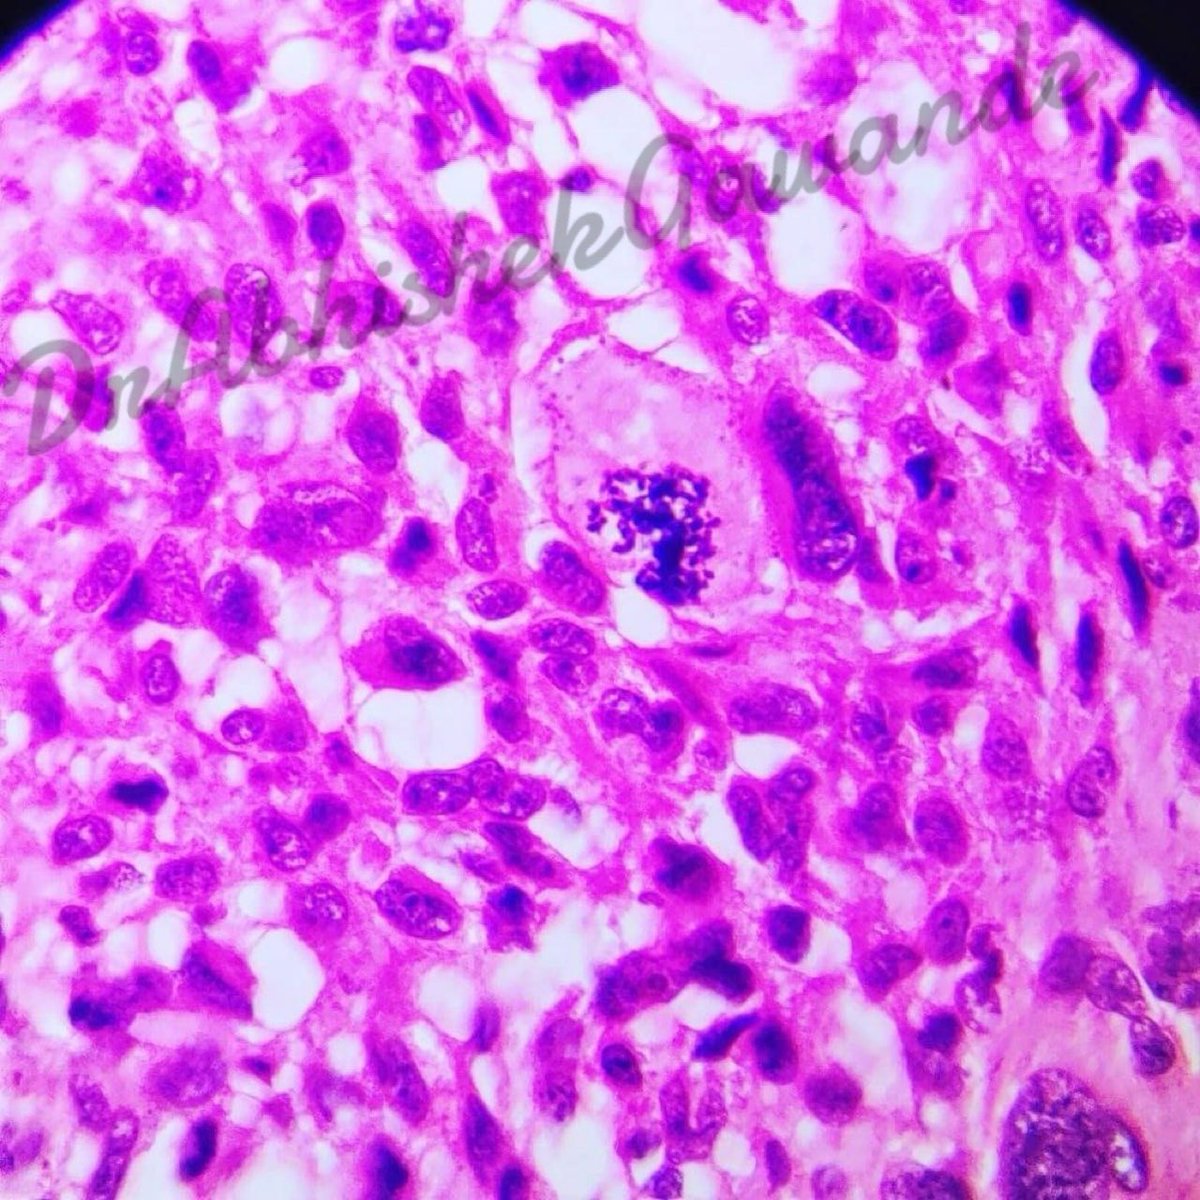 Atypical Mitosis’ in a monstrous cell. High grade Glioma (Glioblastoma Multiforme GBM), captured from my iPhone 14proMax!
#neuropathology #Oncopathology #mitosis #highgradeglioma #gbm #innovation #creativity #iphone14promax #iphonephotography #100xmagnification